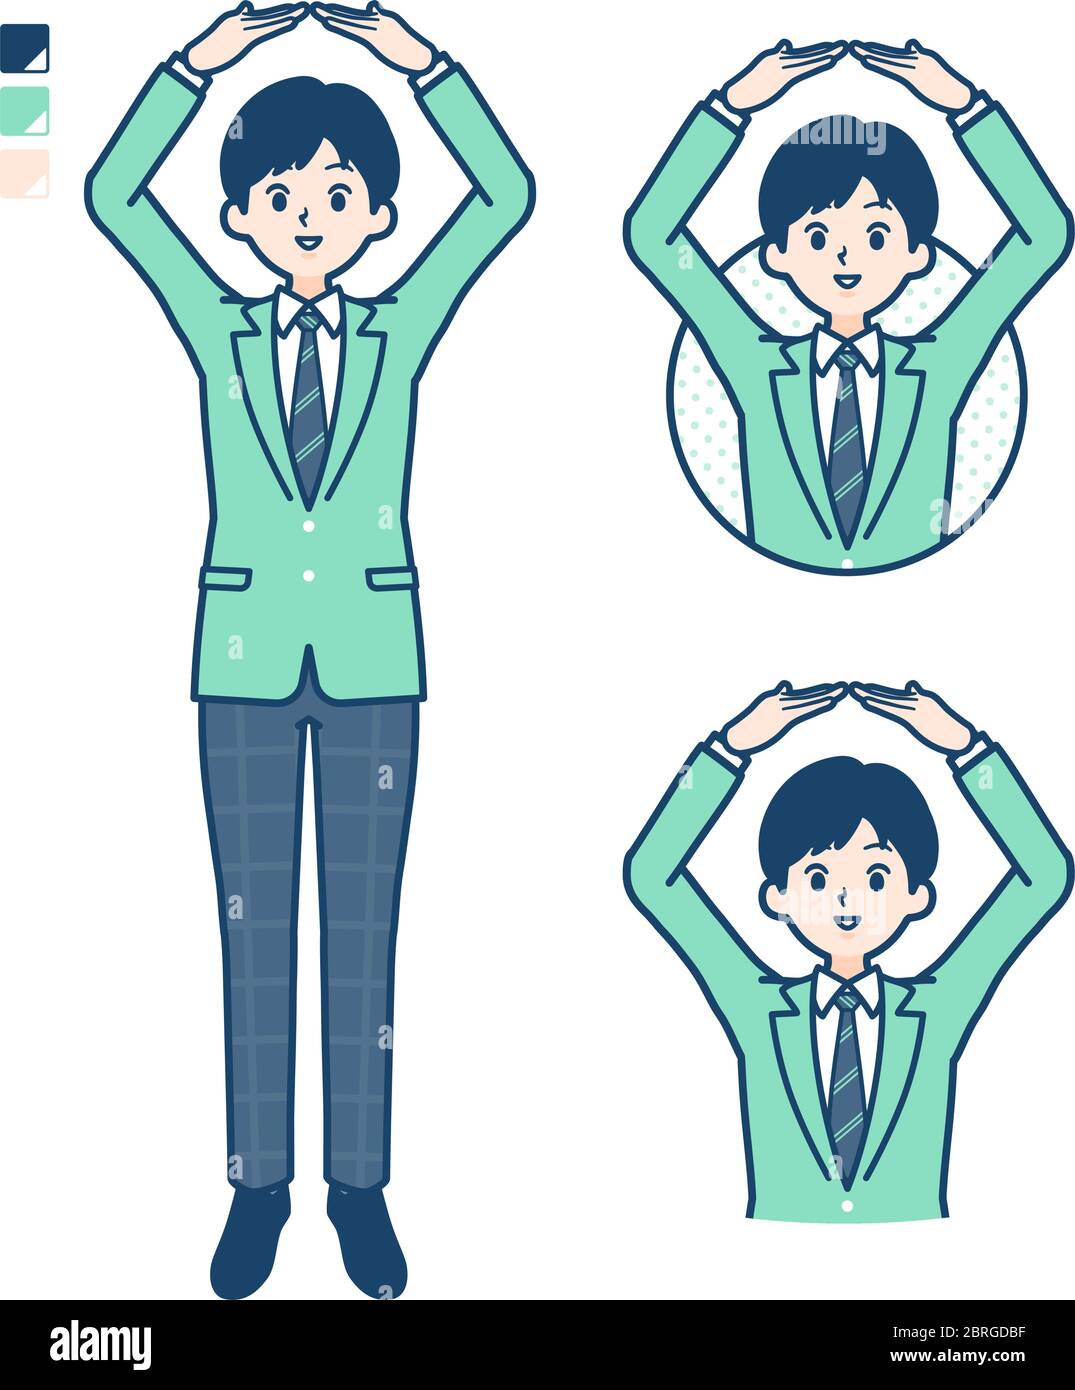 A student boy in a green blazer with Making a circle with arms images. It's vector art so it's easy to edit. Stock Vector